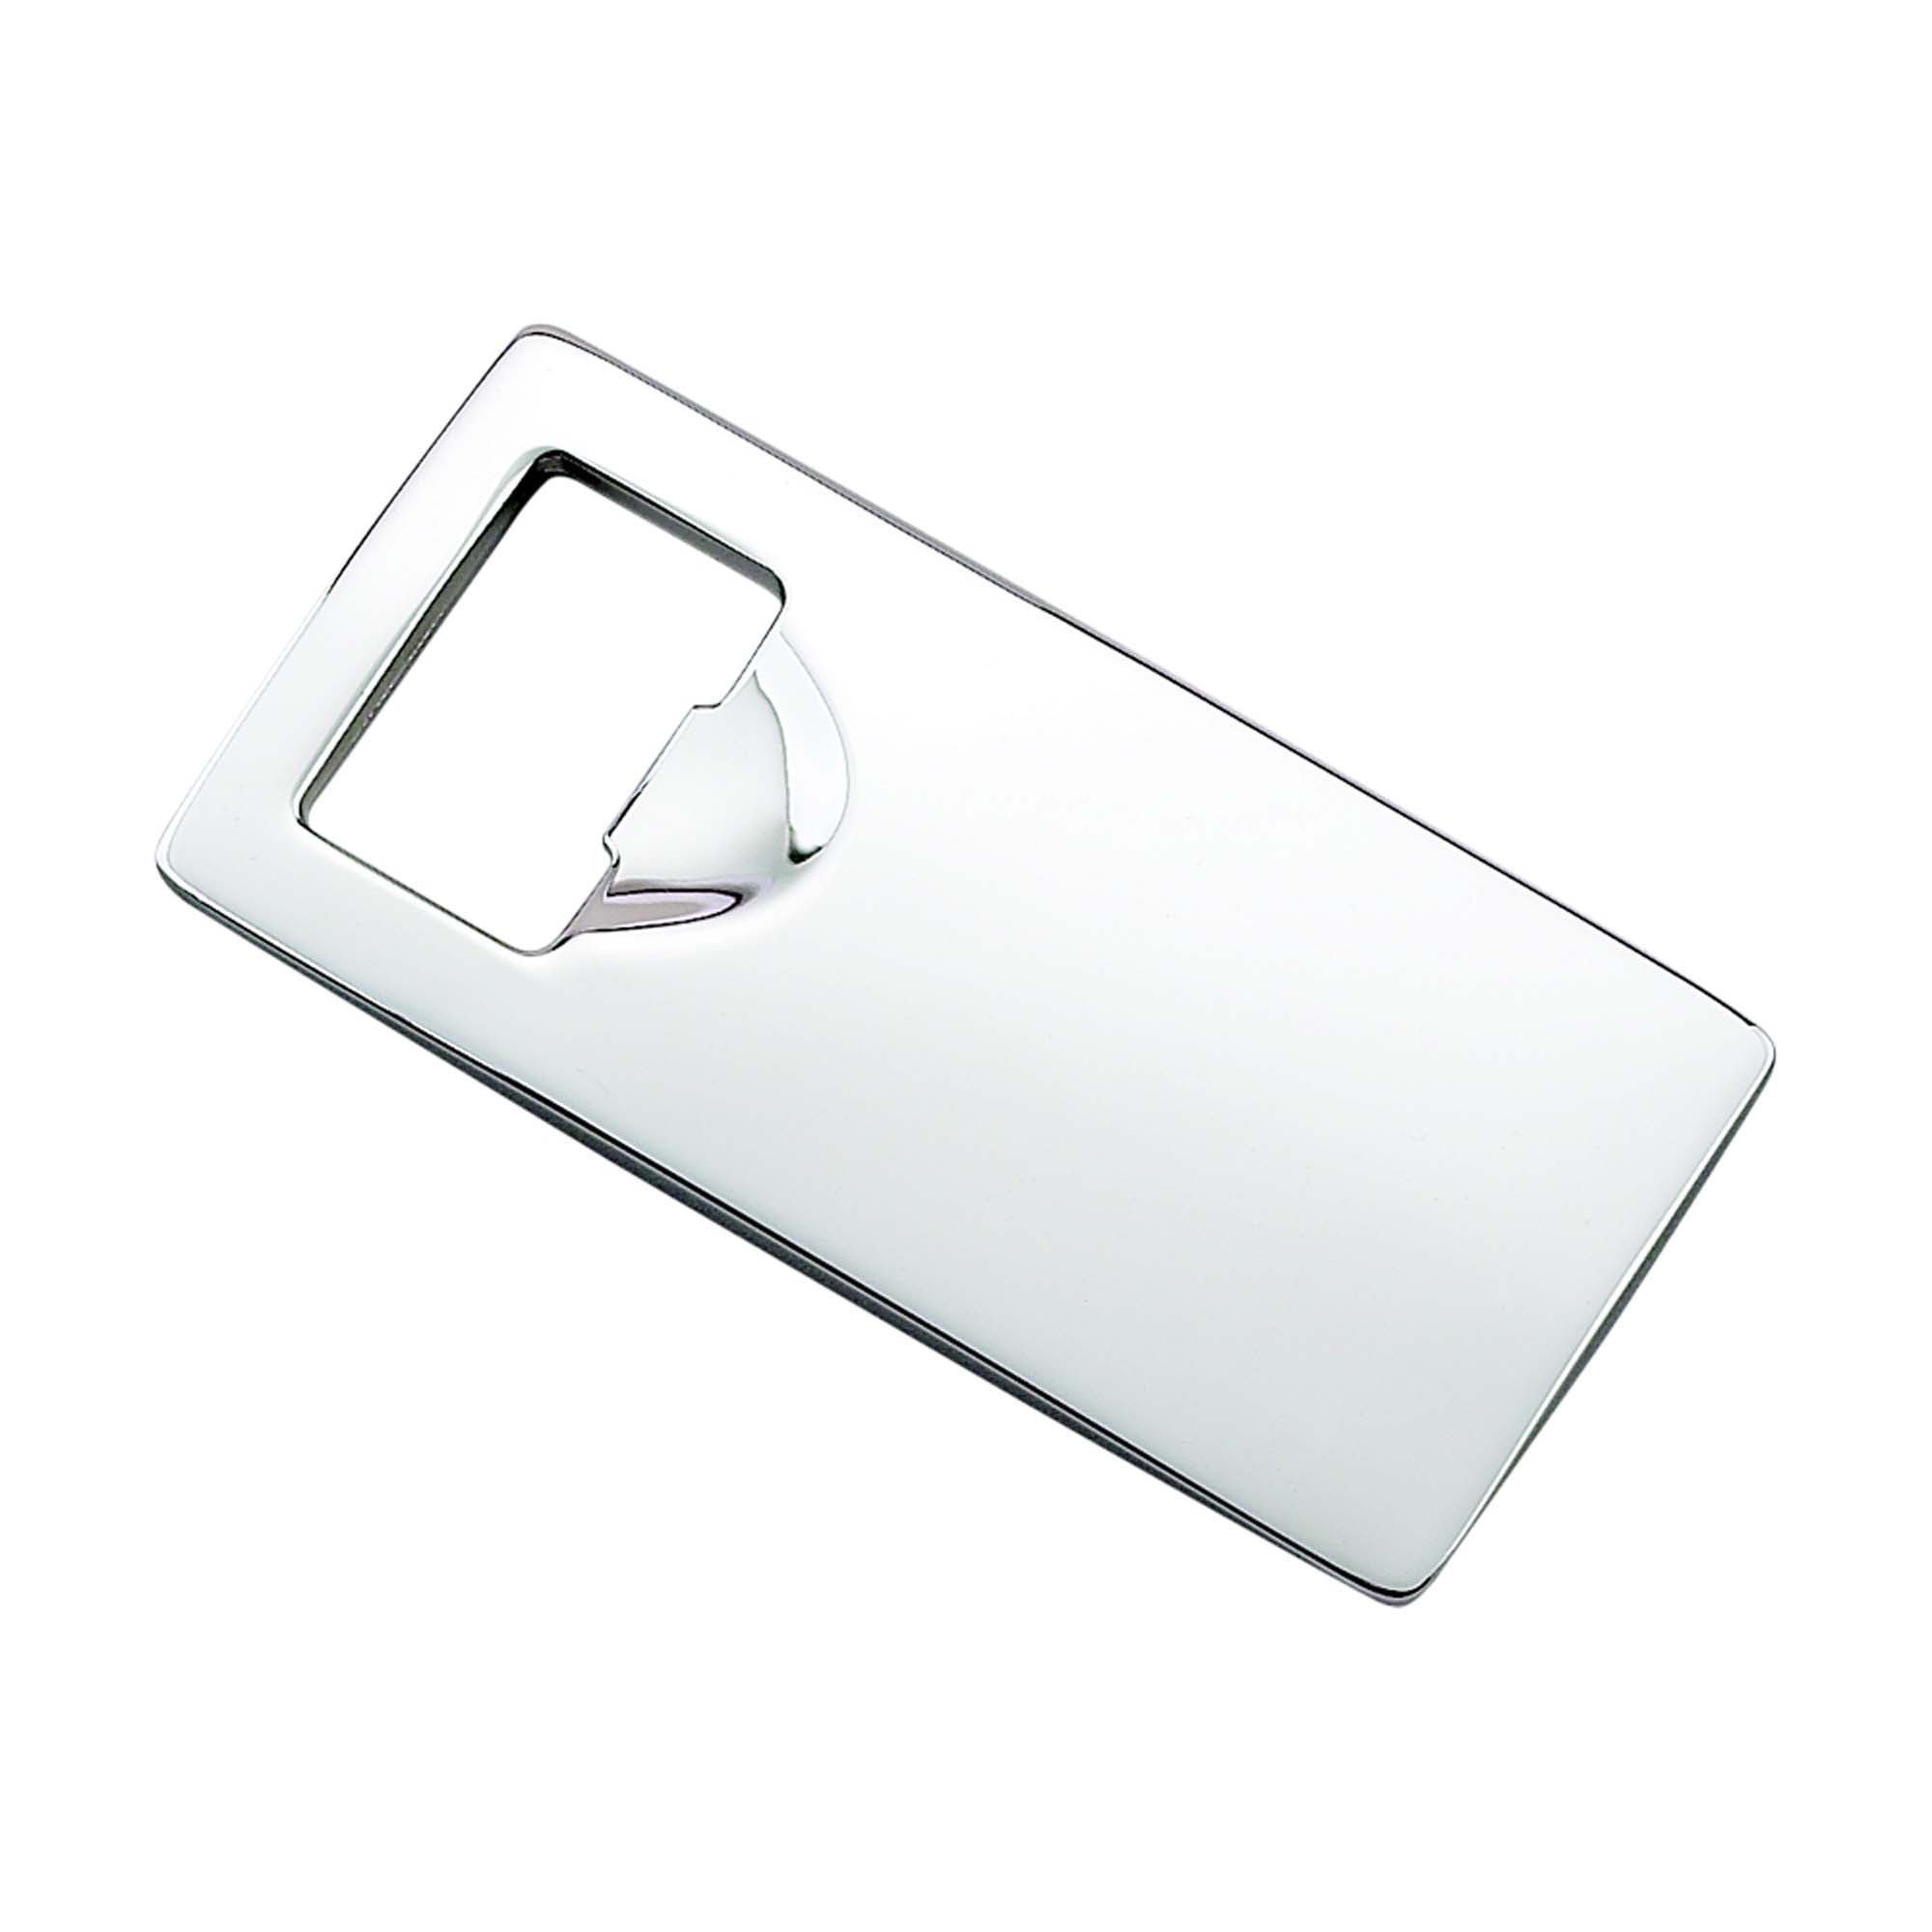 002974 4 In. Rectangle Bottle Opener, Nickel Plated - Silver